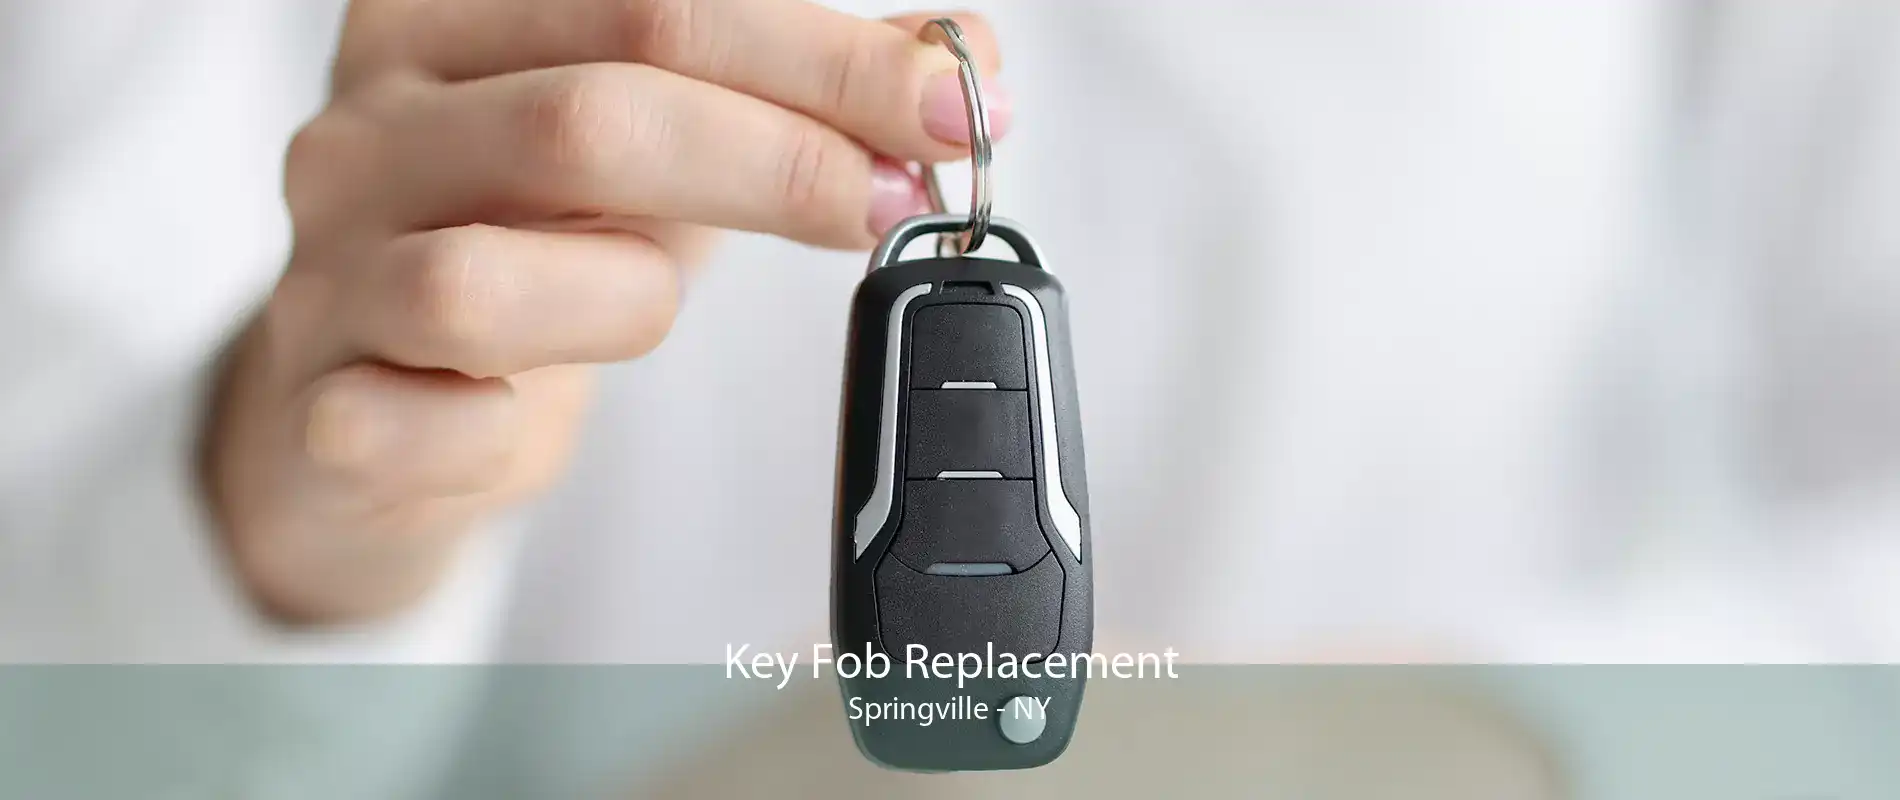 Key Fob Replacement Springville - NY